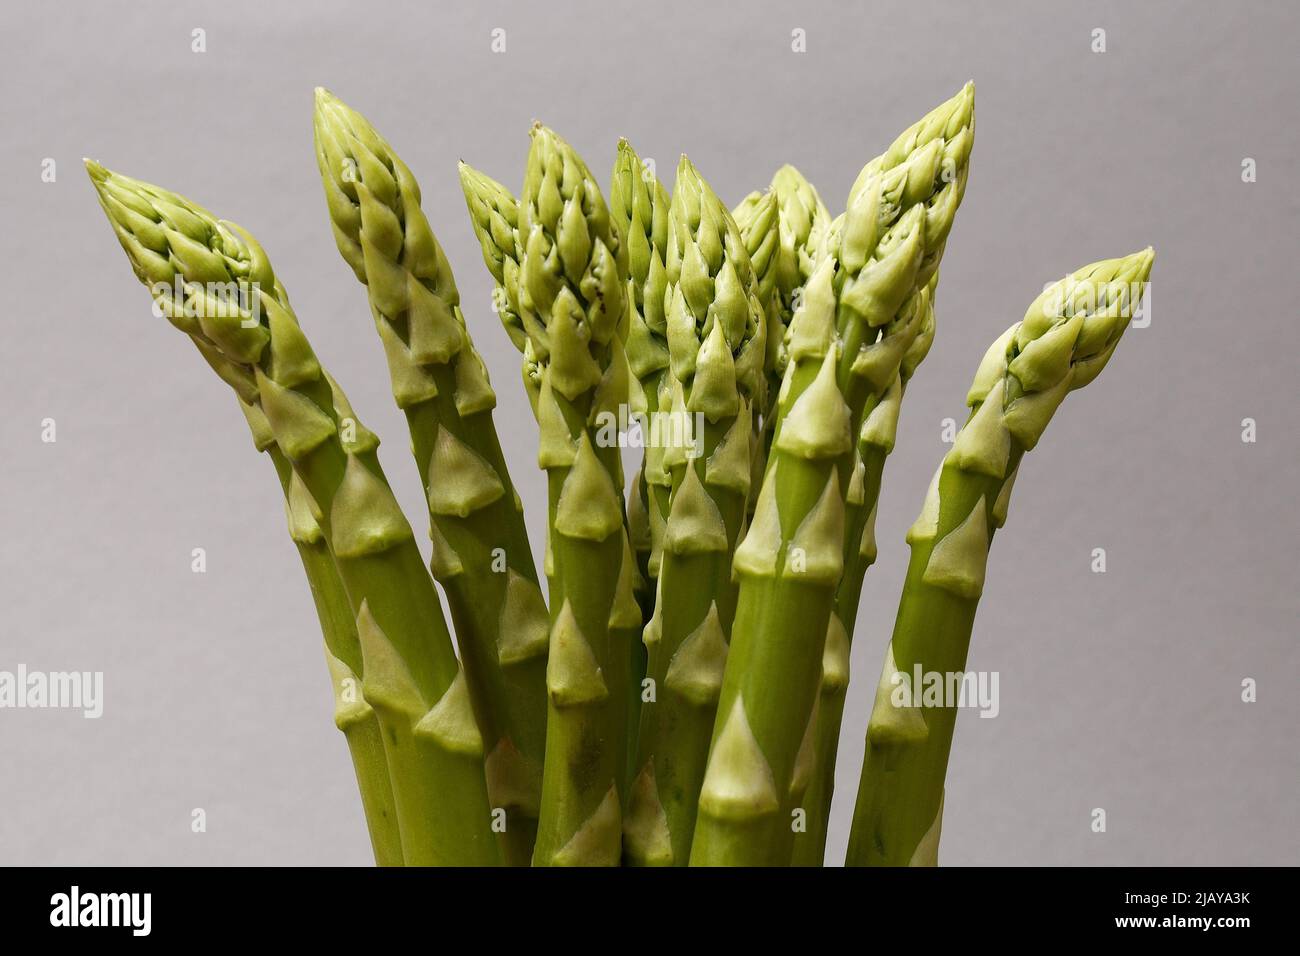 a bunch of asparagus on a neutral background Stock Photo